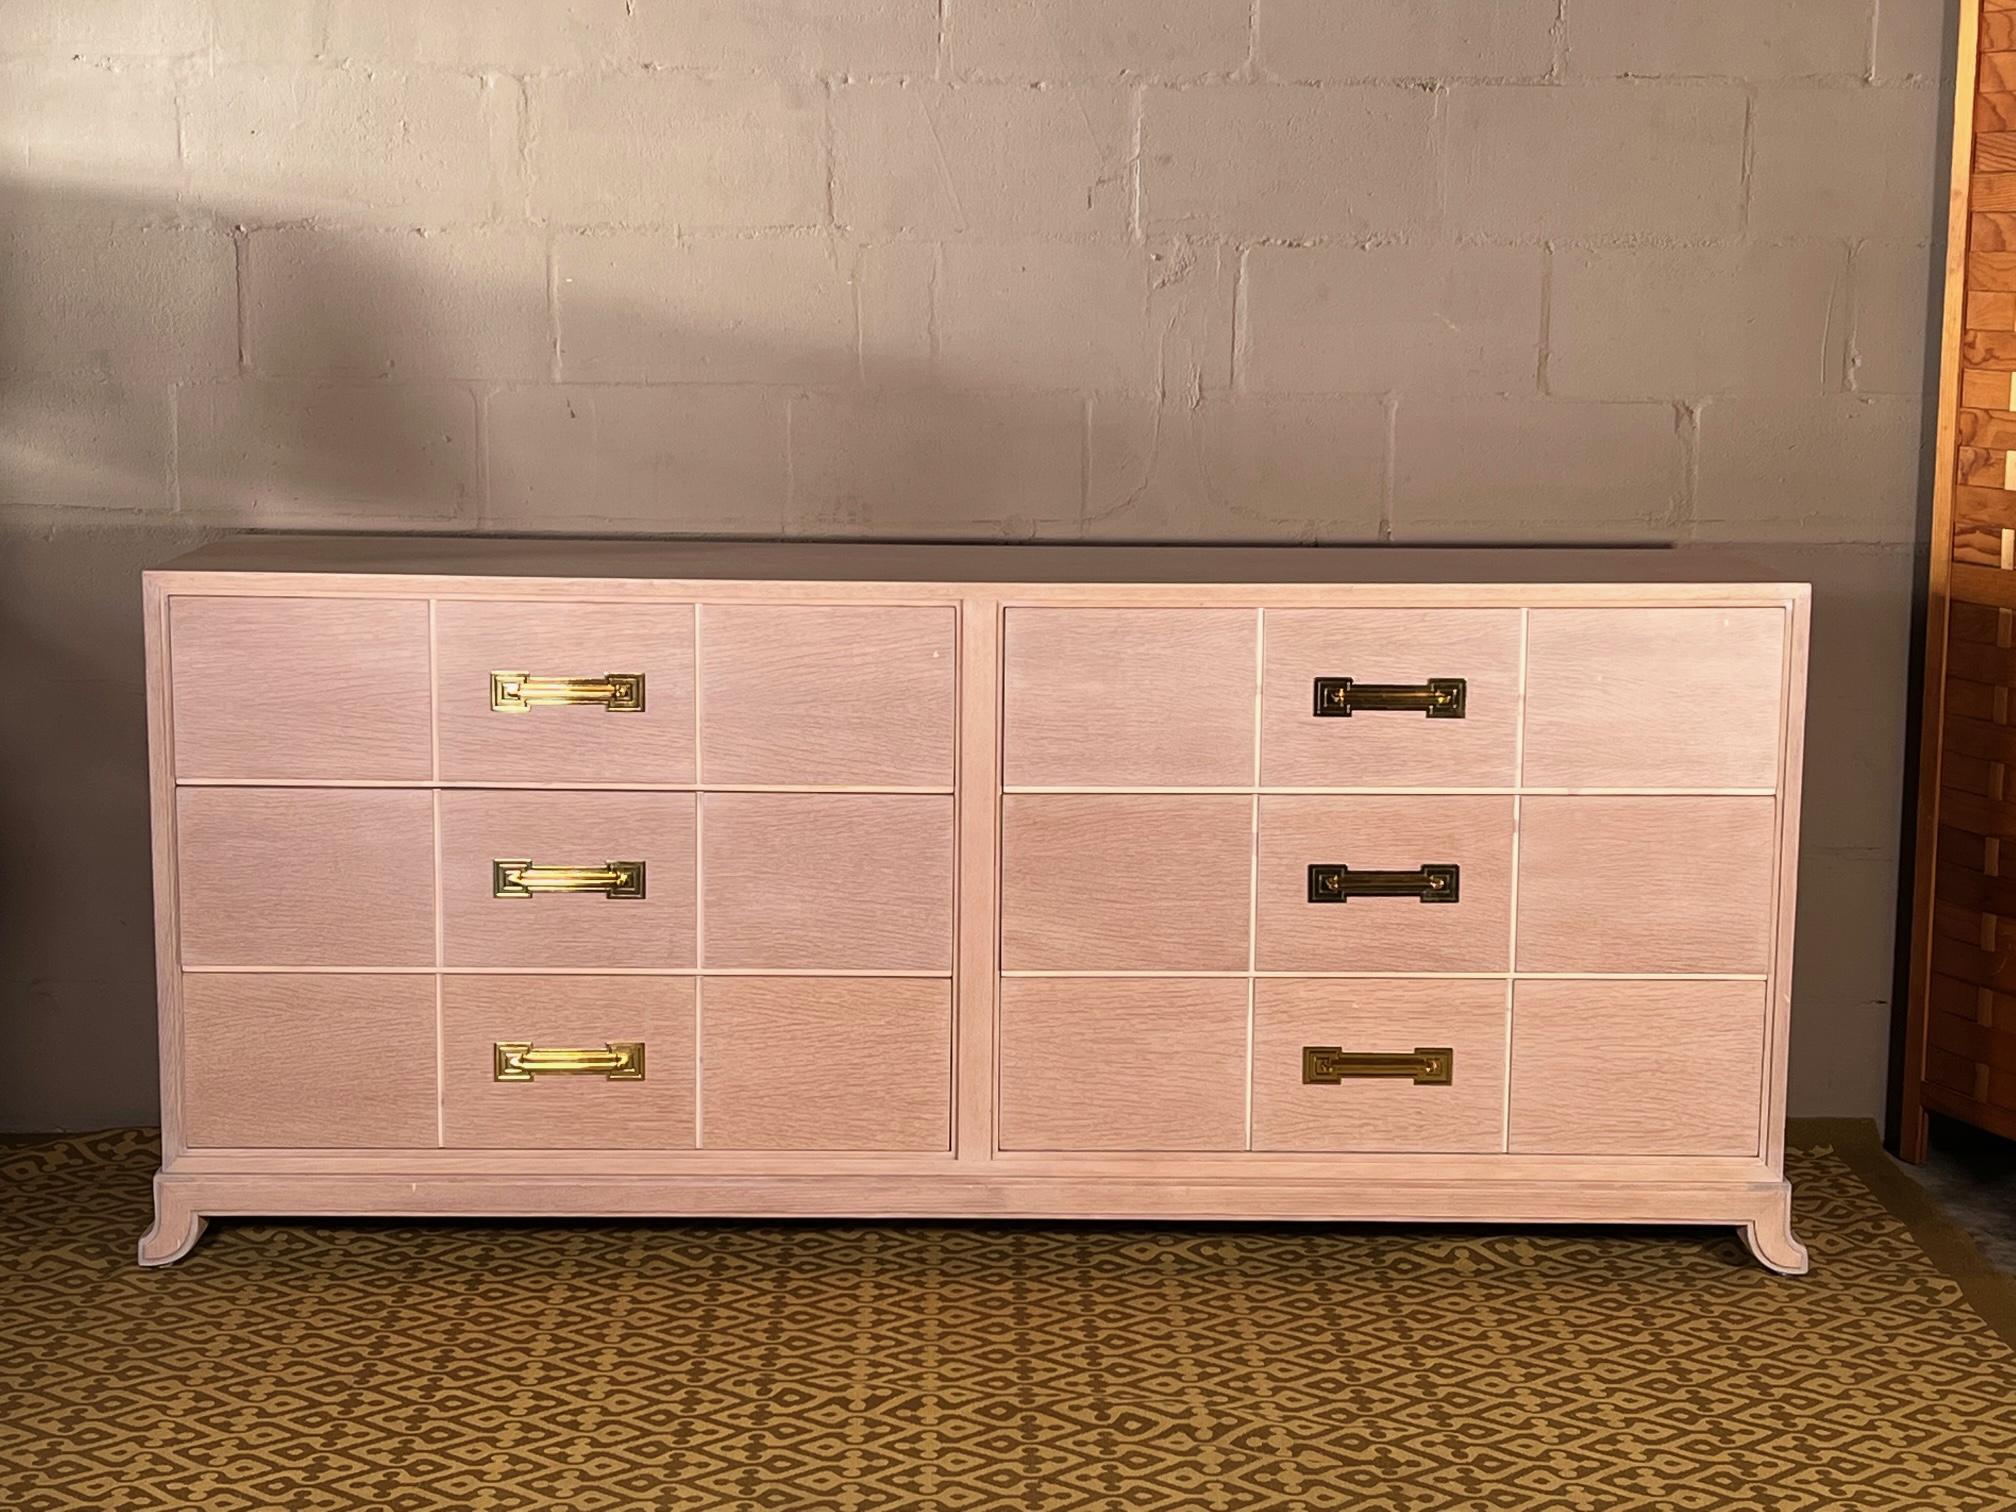 A rare six drawer dresser by Tommi Parzinger for Charak Modern ca' 1950's. From original owner. Pickled oak with original, polished and laquered hardware. This piece is elegant and light. The color is flesh white that appears white or more peachy